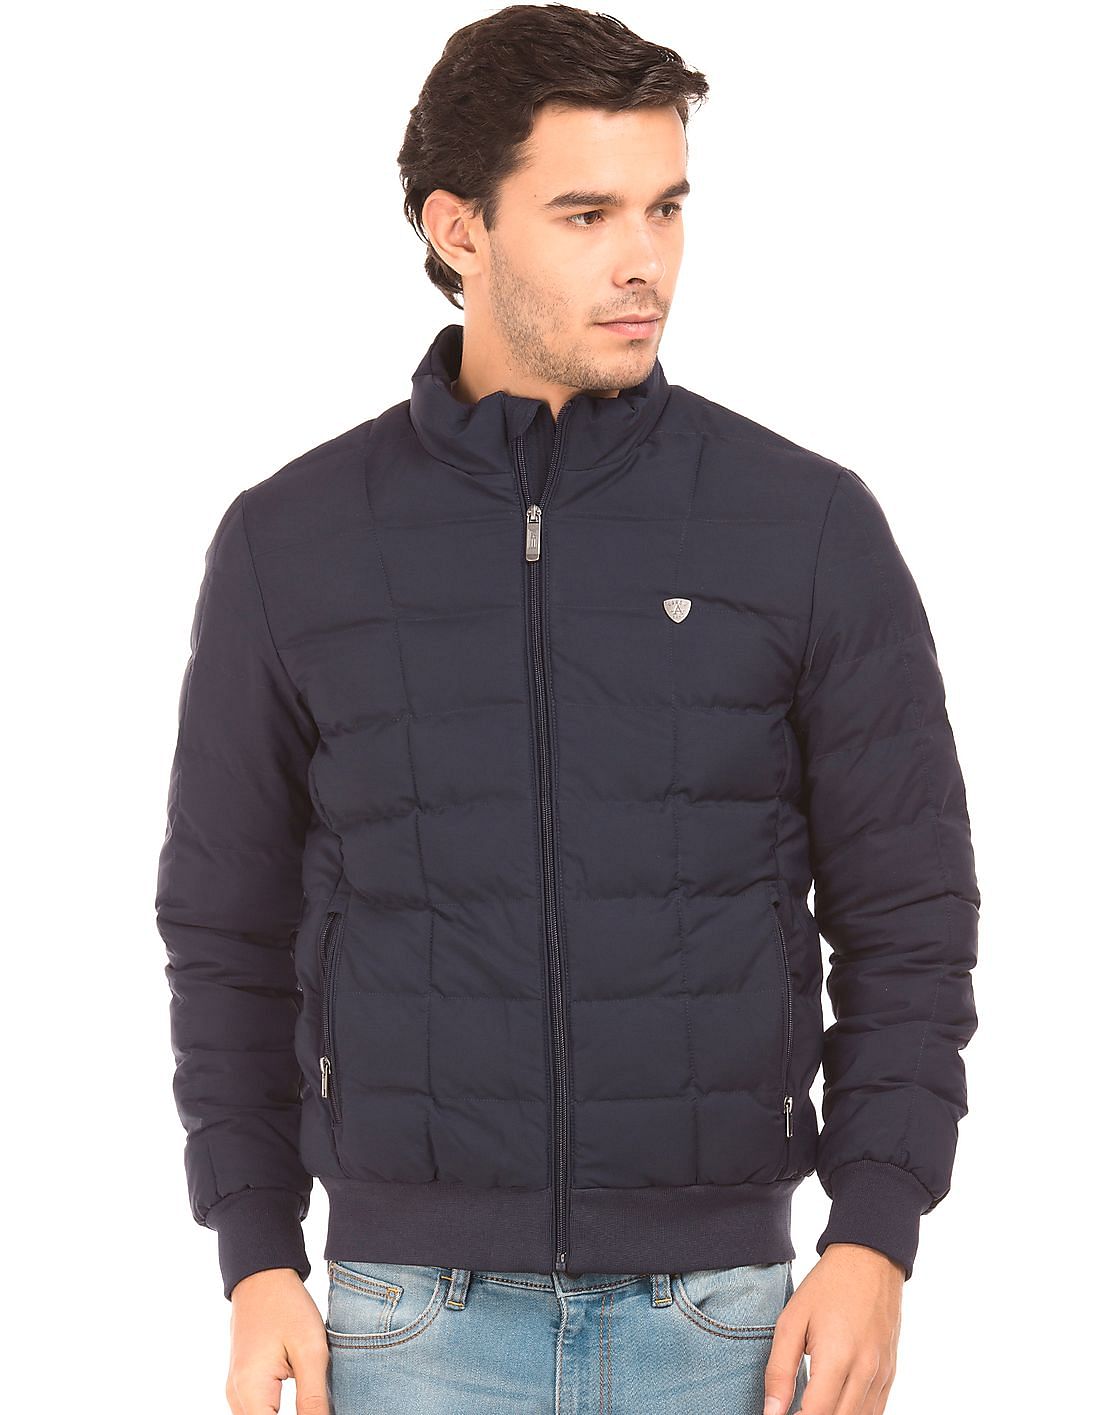 Buy Arrow Sports Zip Up Quilted Puffer Jacket - NNNOW.com